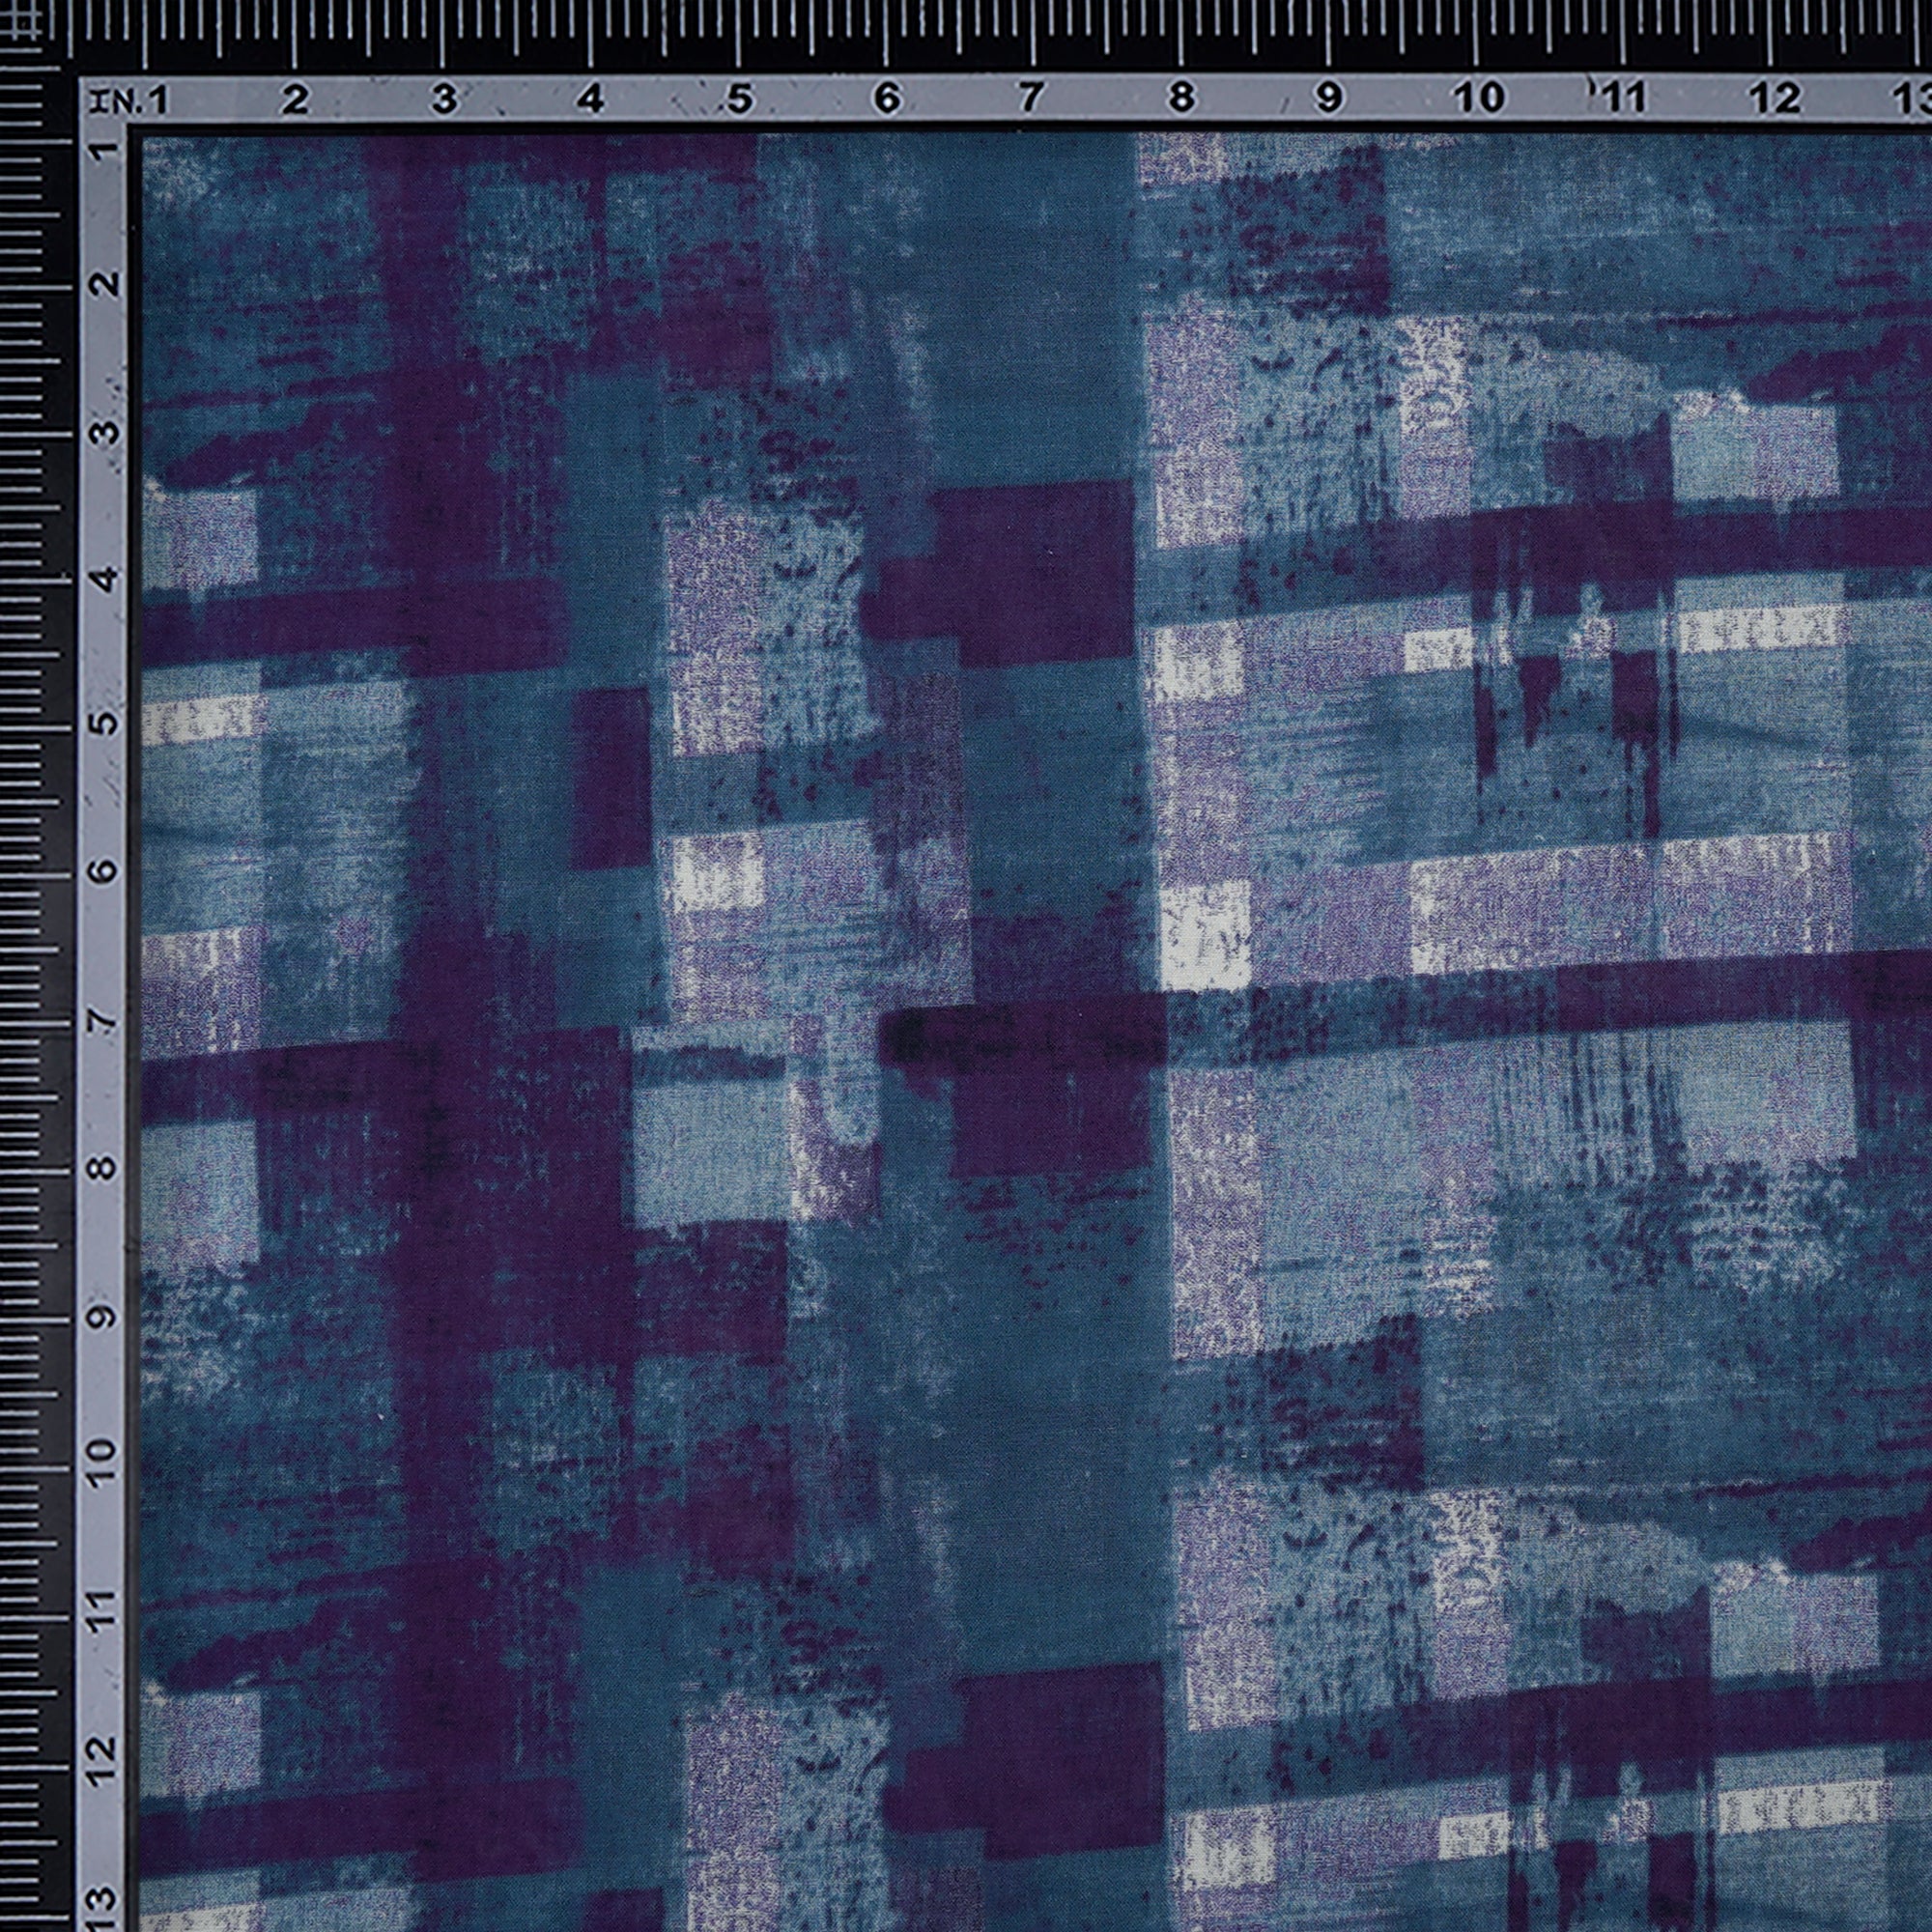 Purple-Teal Color Digital Printed High Twisted Cotton Voile Fabric